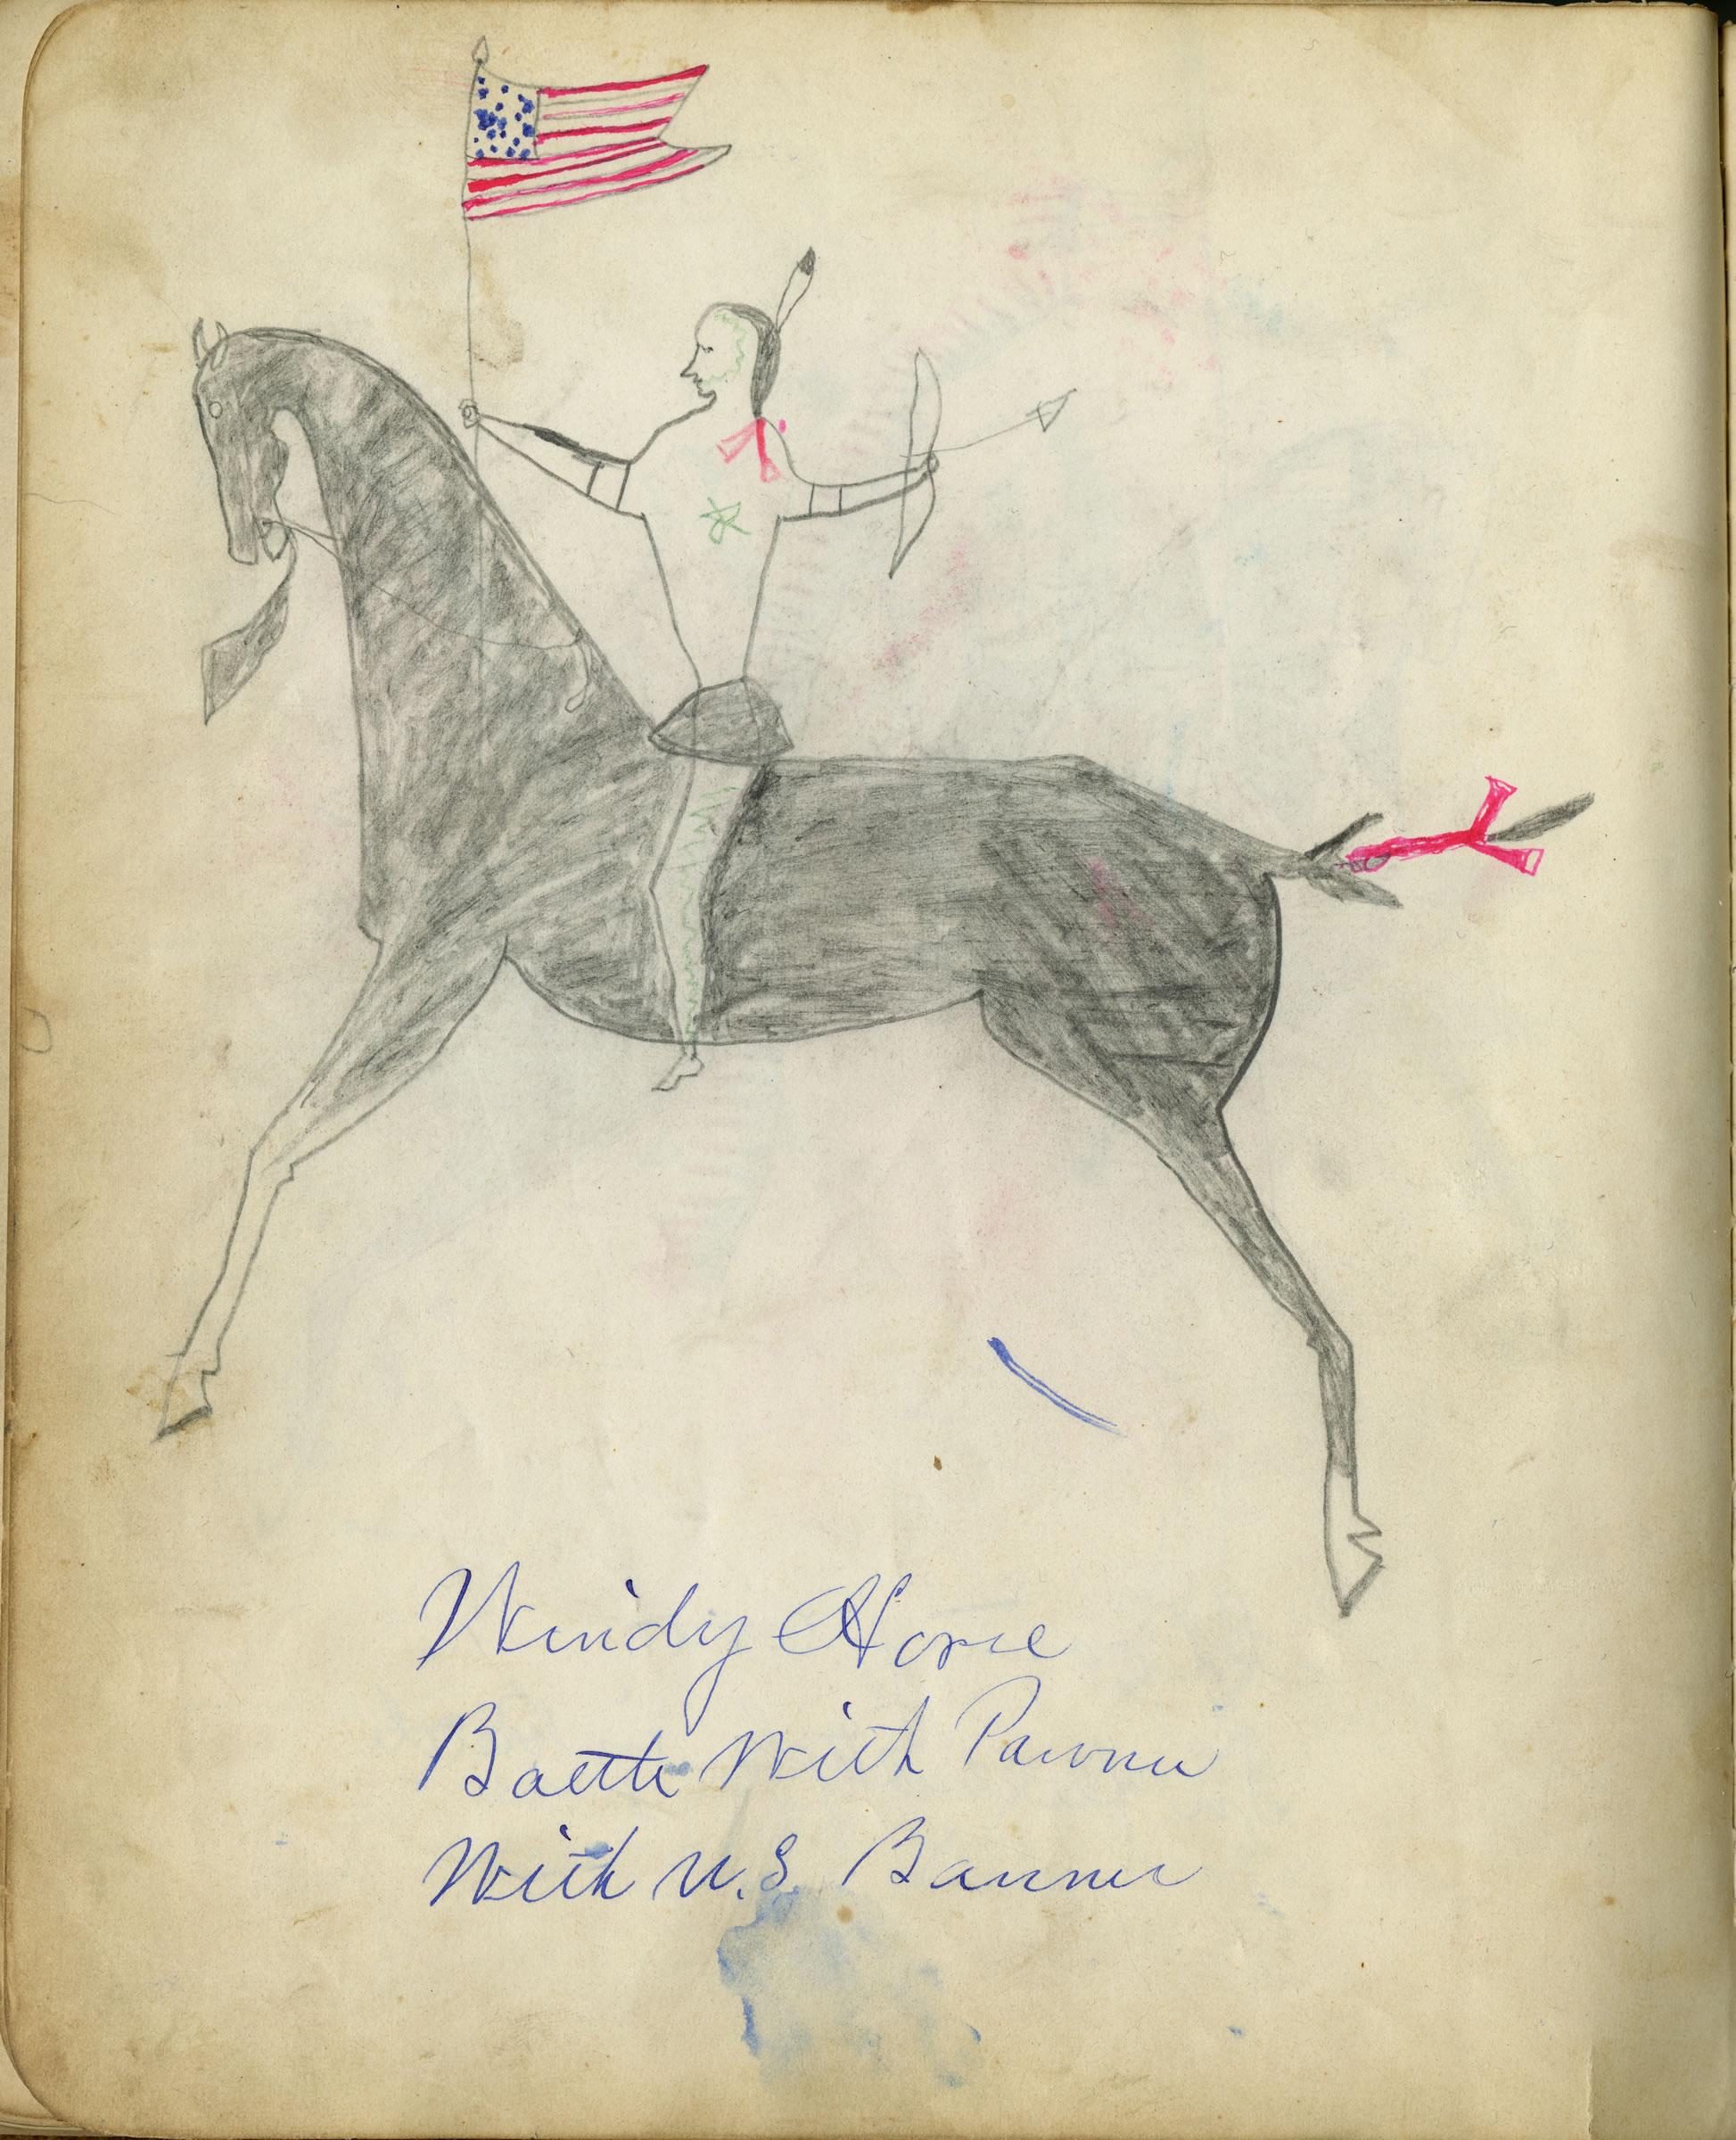 Fales-Freeman Brulé Ledger: Plate 09 Windy Horse Battle With Pawnee With U.S. Banner / Windy Horse In Battle With Pawnee - Saving White Thunder the Chief of the Brulé Sioux Indian - Myself and his Horse Wounded 